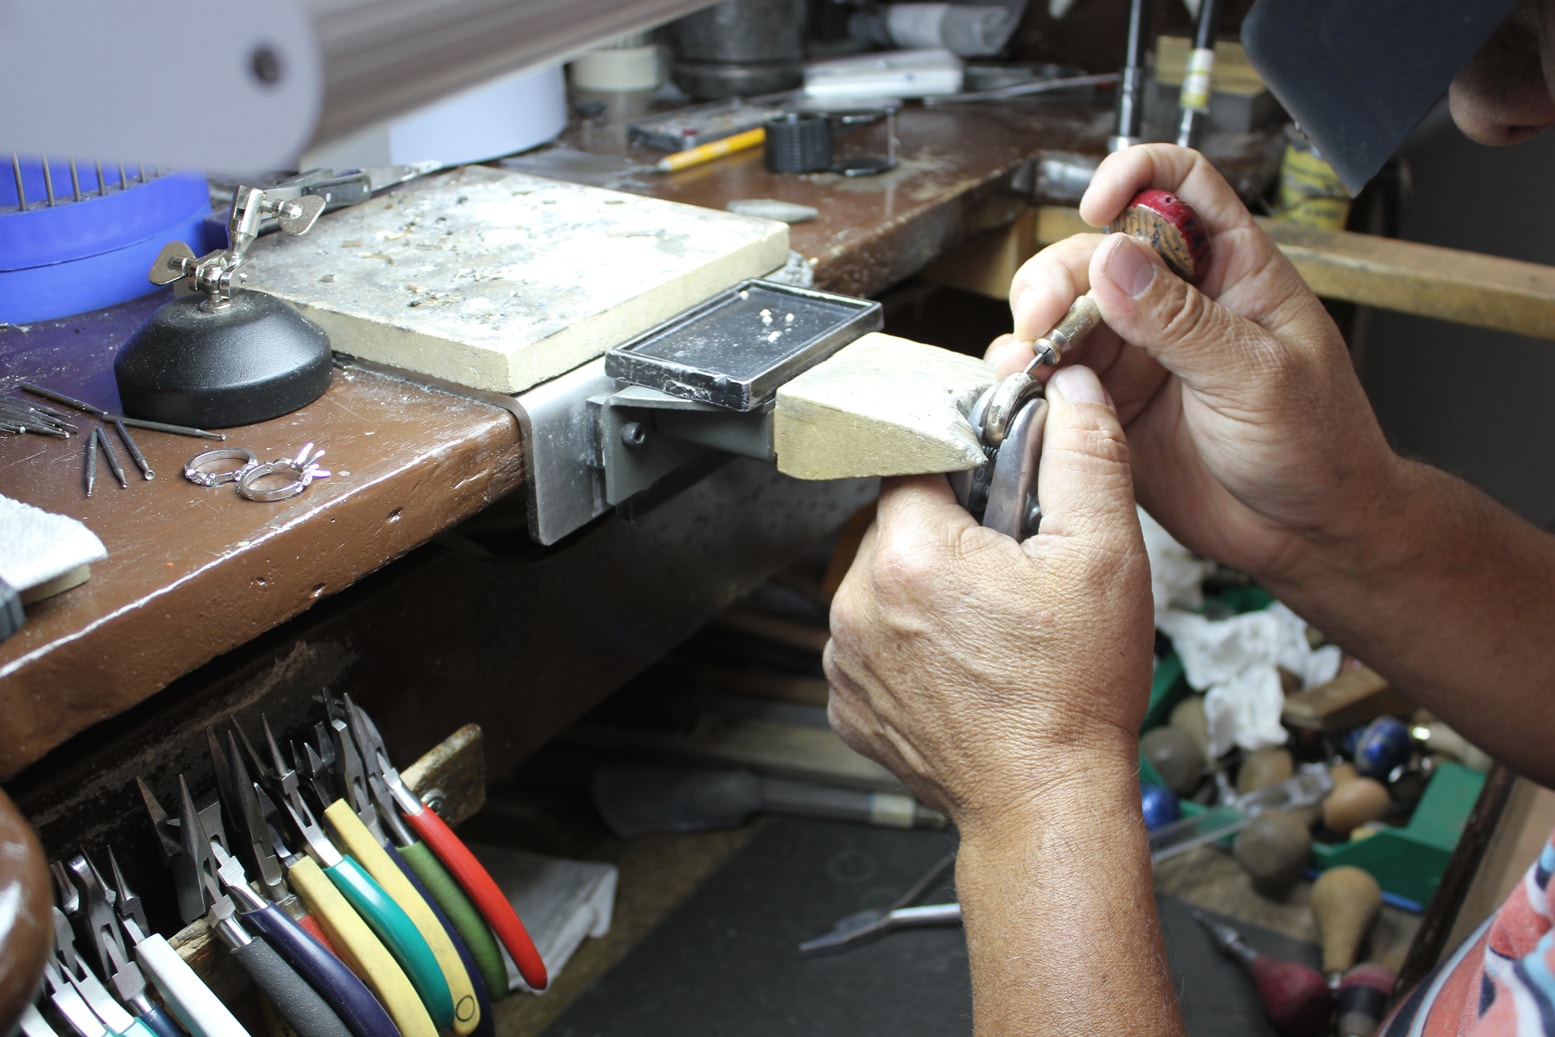 Your unique design will be polished by our expert bench jewelers